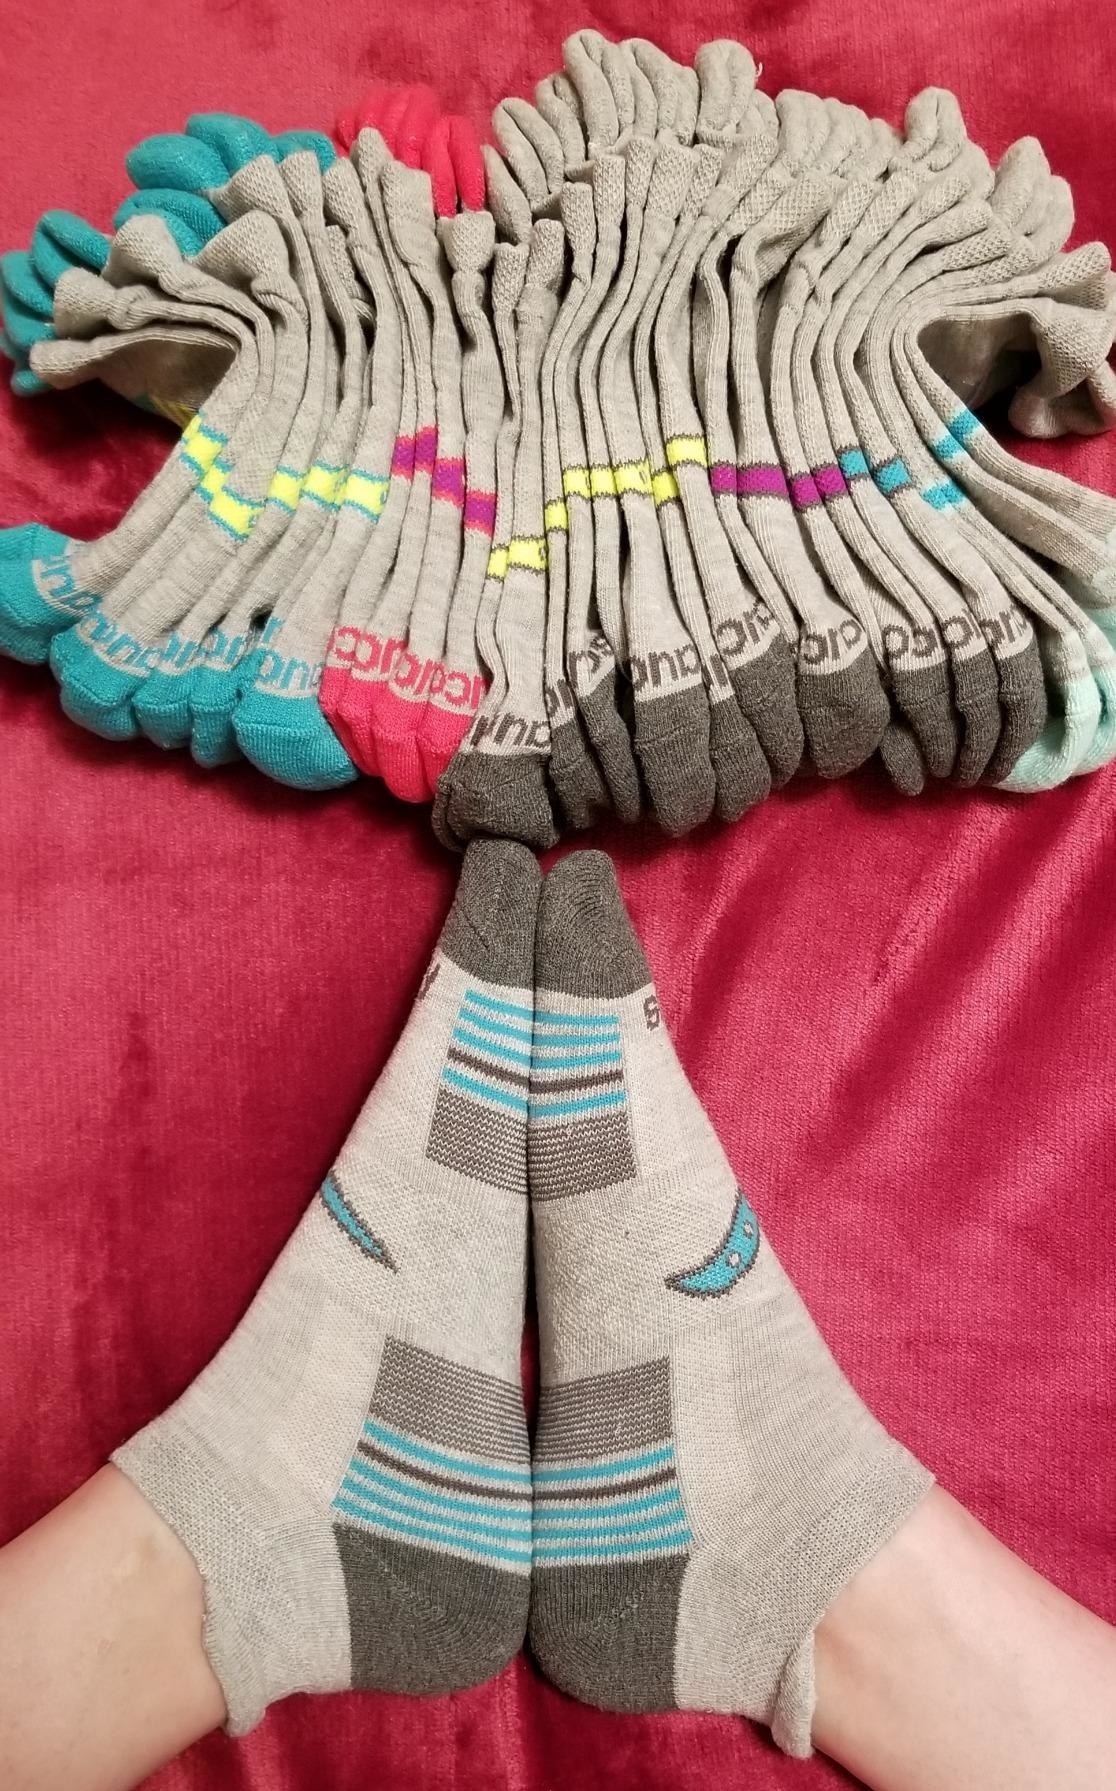 reviewer in gray and blue striped running socks with heel tabs on back